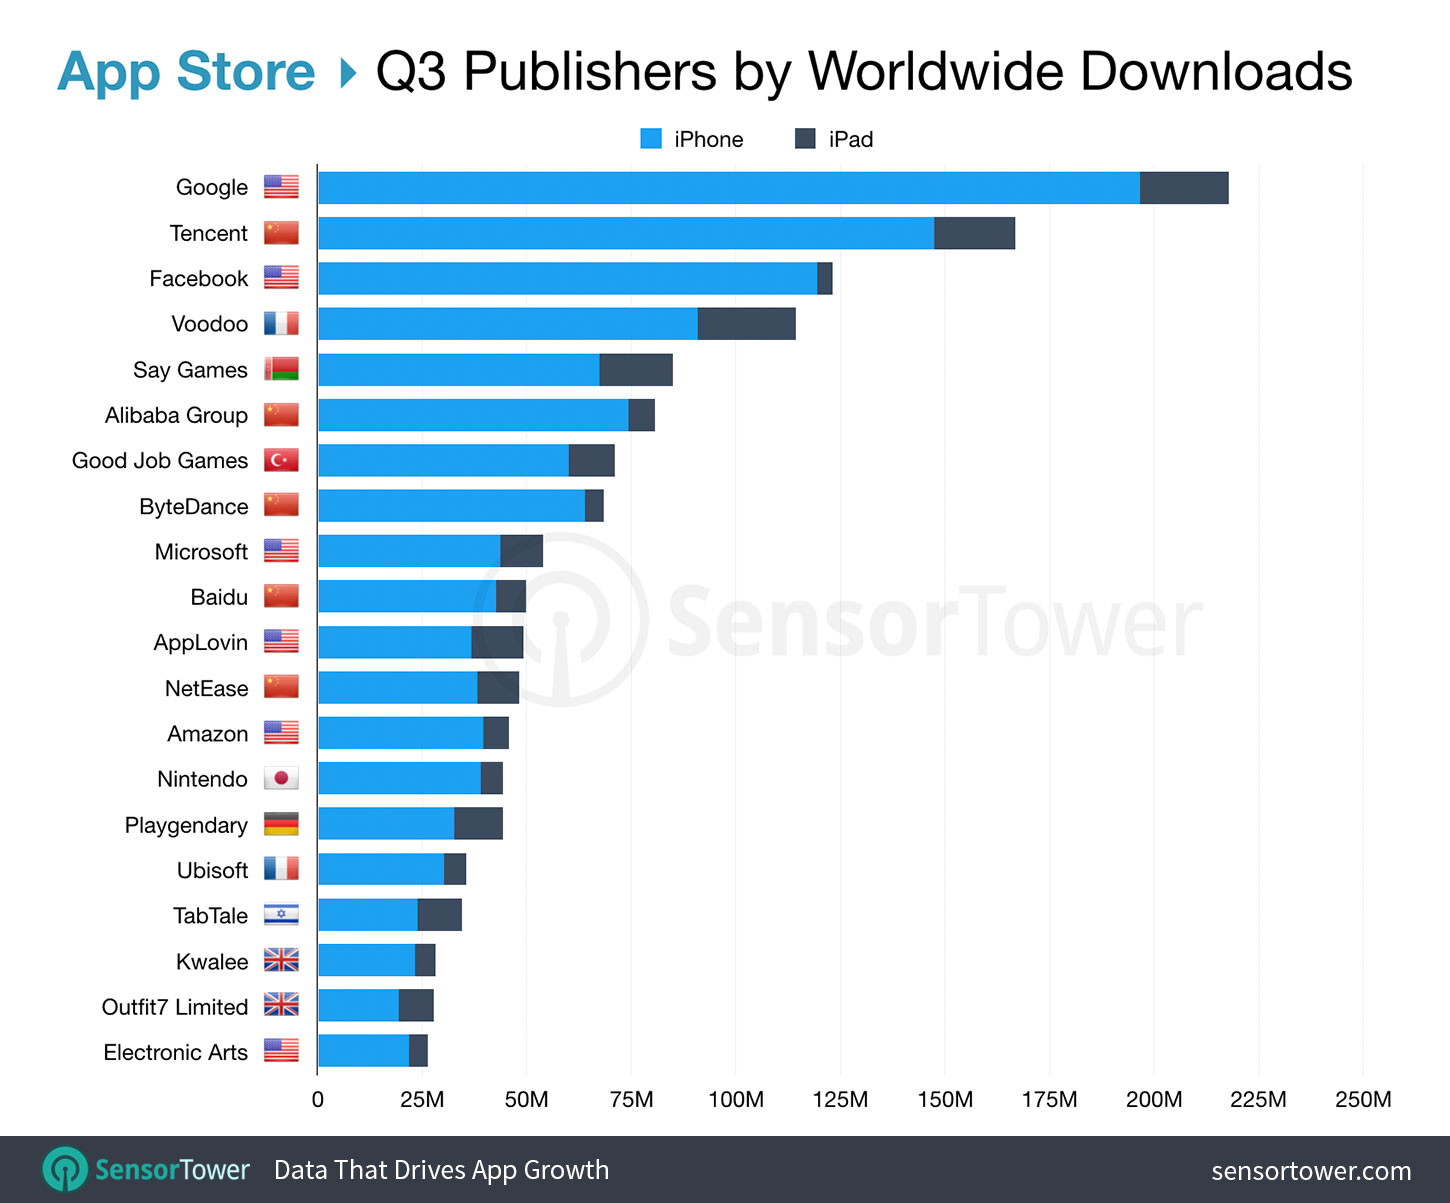 Top Mobile Publishers Worldwide for Q3 2019 by Downloads